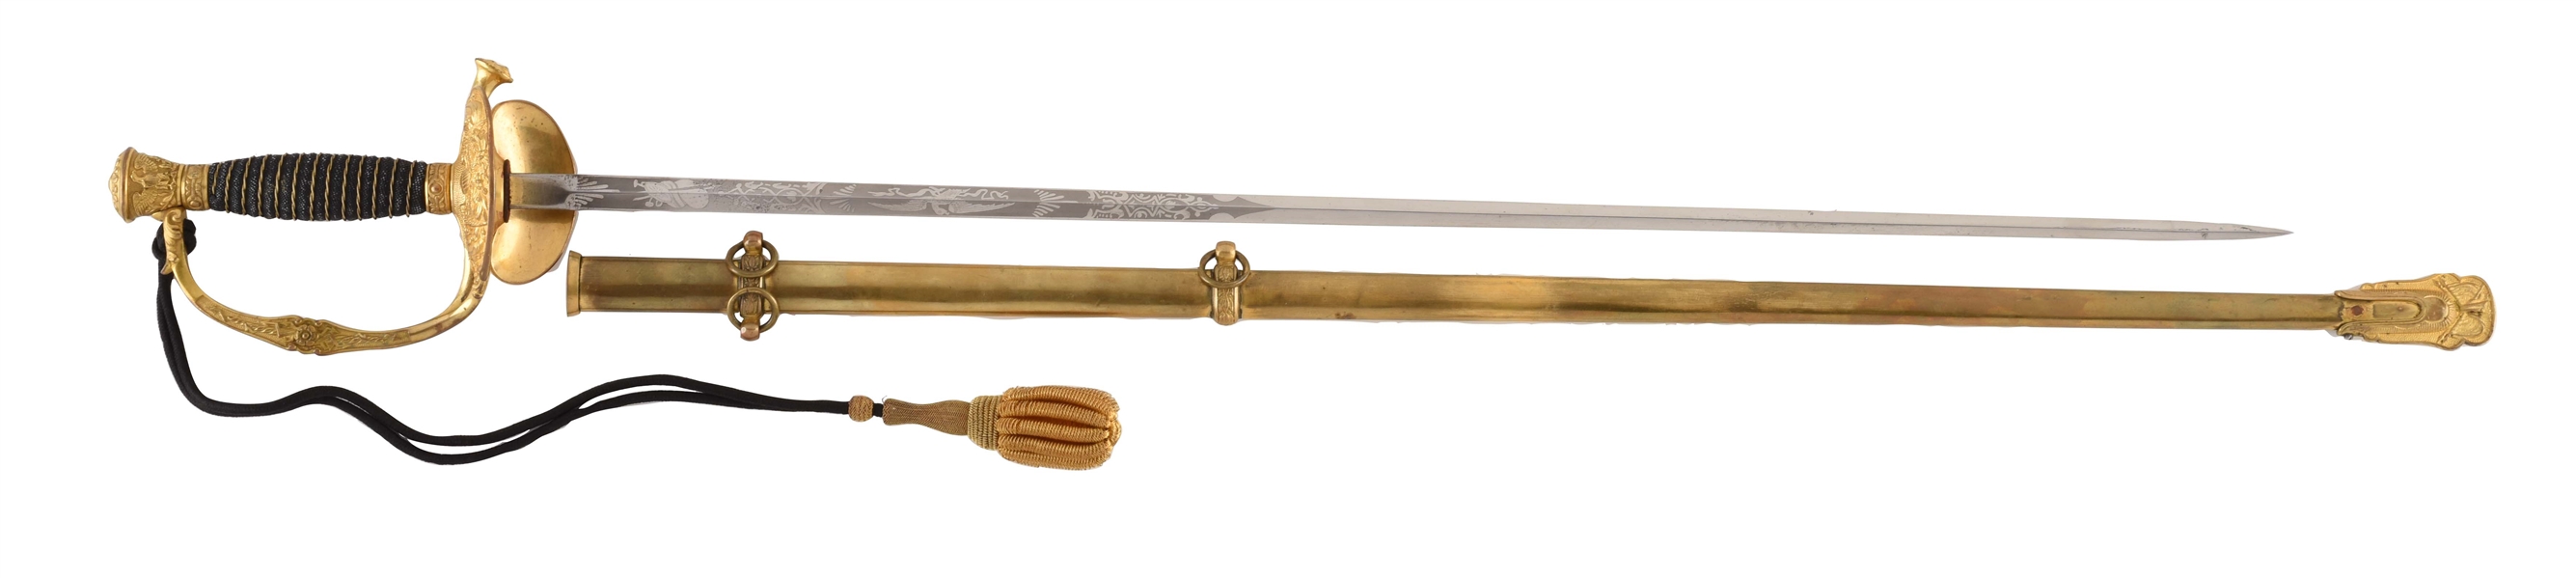 AMES 1860 STAFF & FIELD OFFICER SWORD WITH SCABBARD.